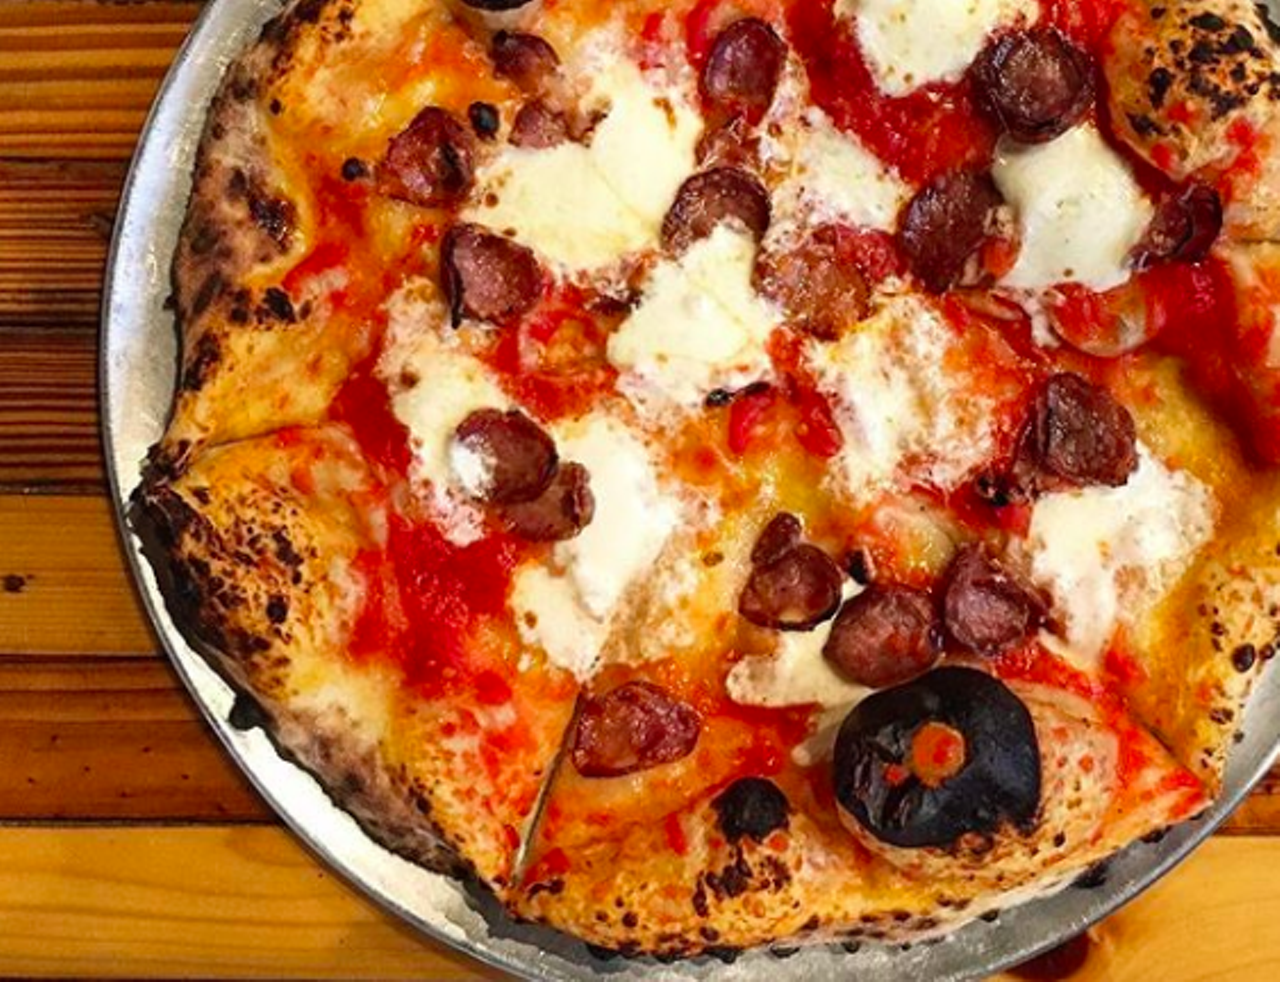 Il Forno
122 Nogalitos St, (210) 616-2198, ilfornosa.com
Since 2016, Il Forno has offered pizza, made-from-scratch, with fresh vegetables, housemade prosciutto, coppa and pepperoni. Always thoughtful and creative, Il Forno arguably delivers the best pizza in the city.
Photo via Instagram / safoodnstuff